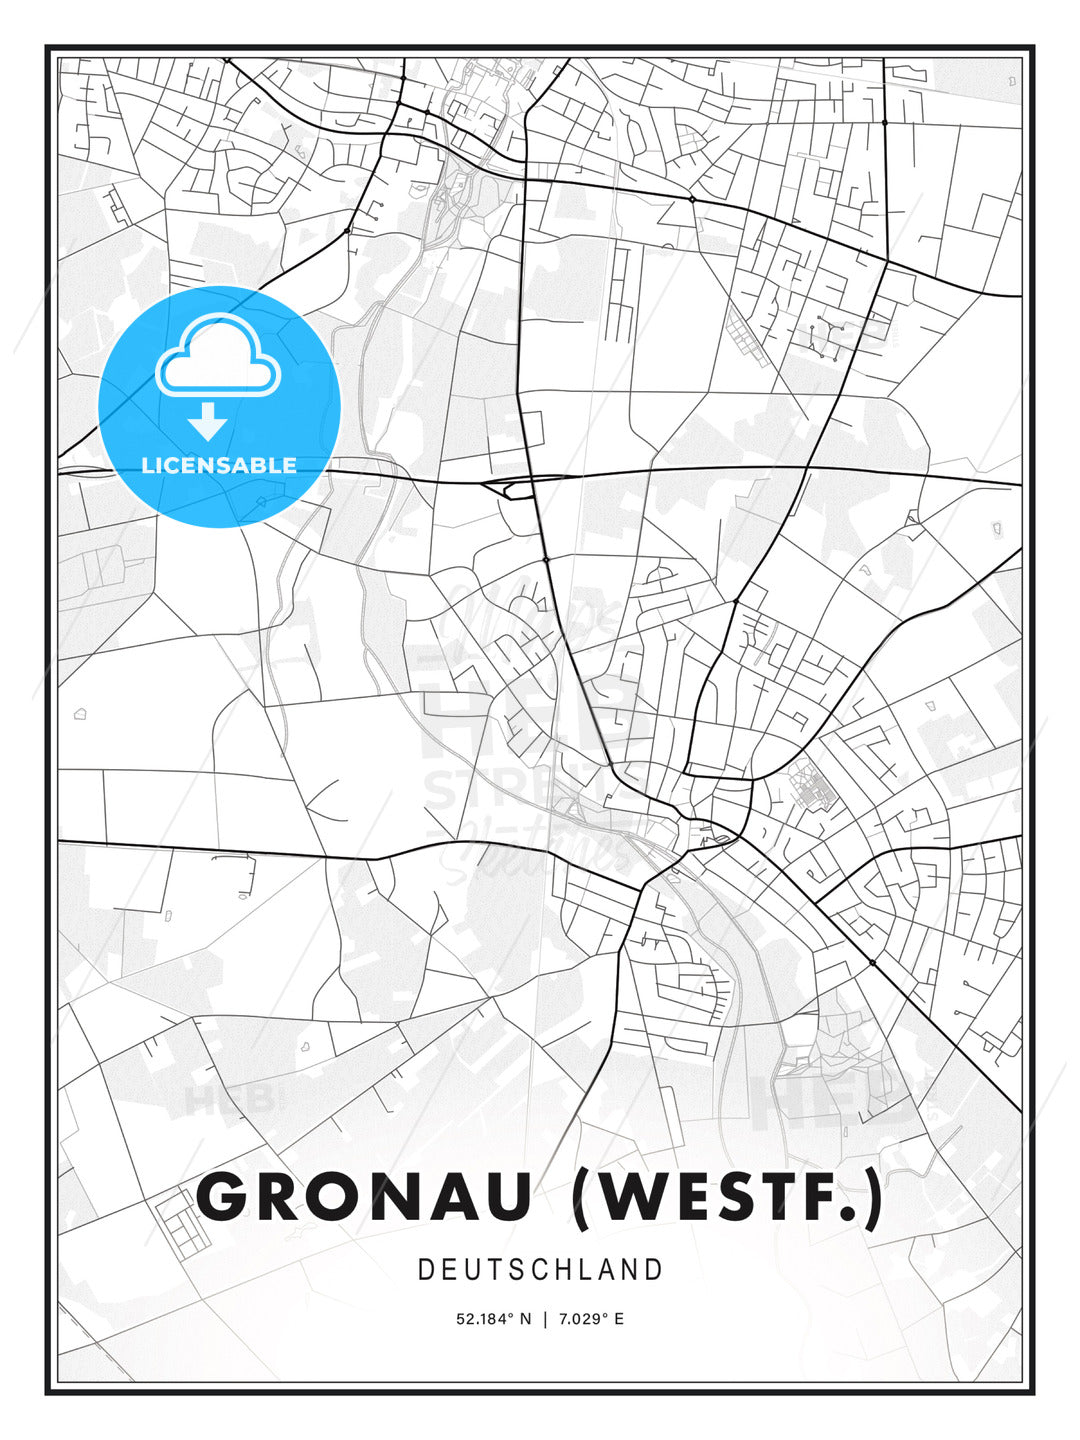 Gronau (Westf.), Germany, Modern Print Template in Various Formats - HEBSTREITS Sketches